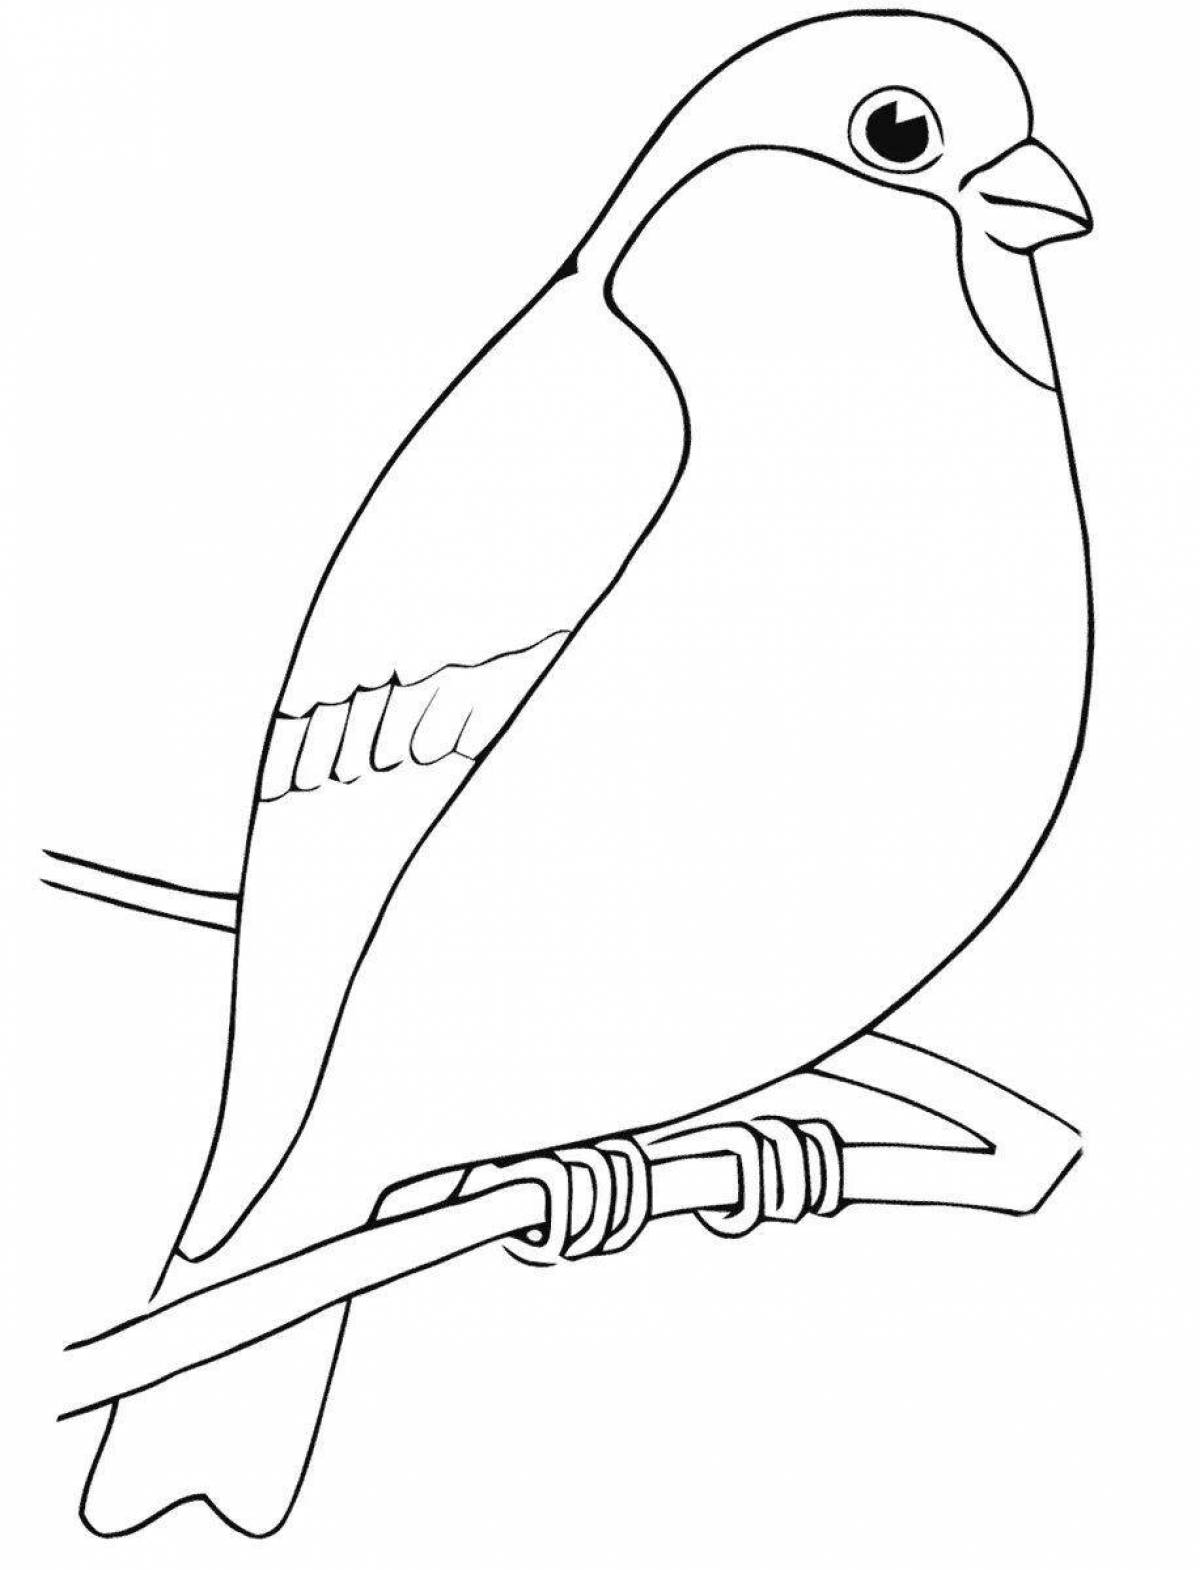 Exciting bullfinch coloring book for kids 6-7 years old